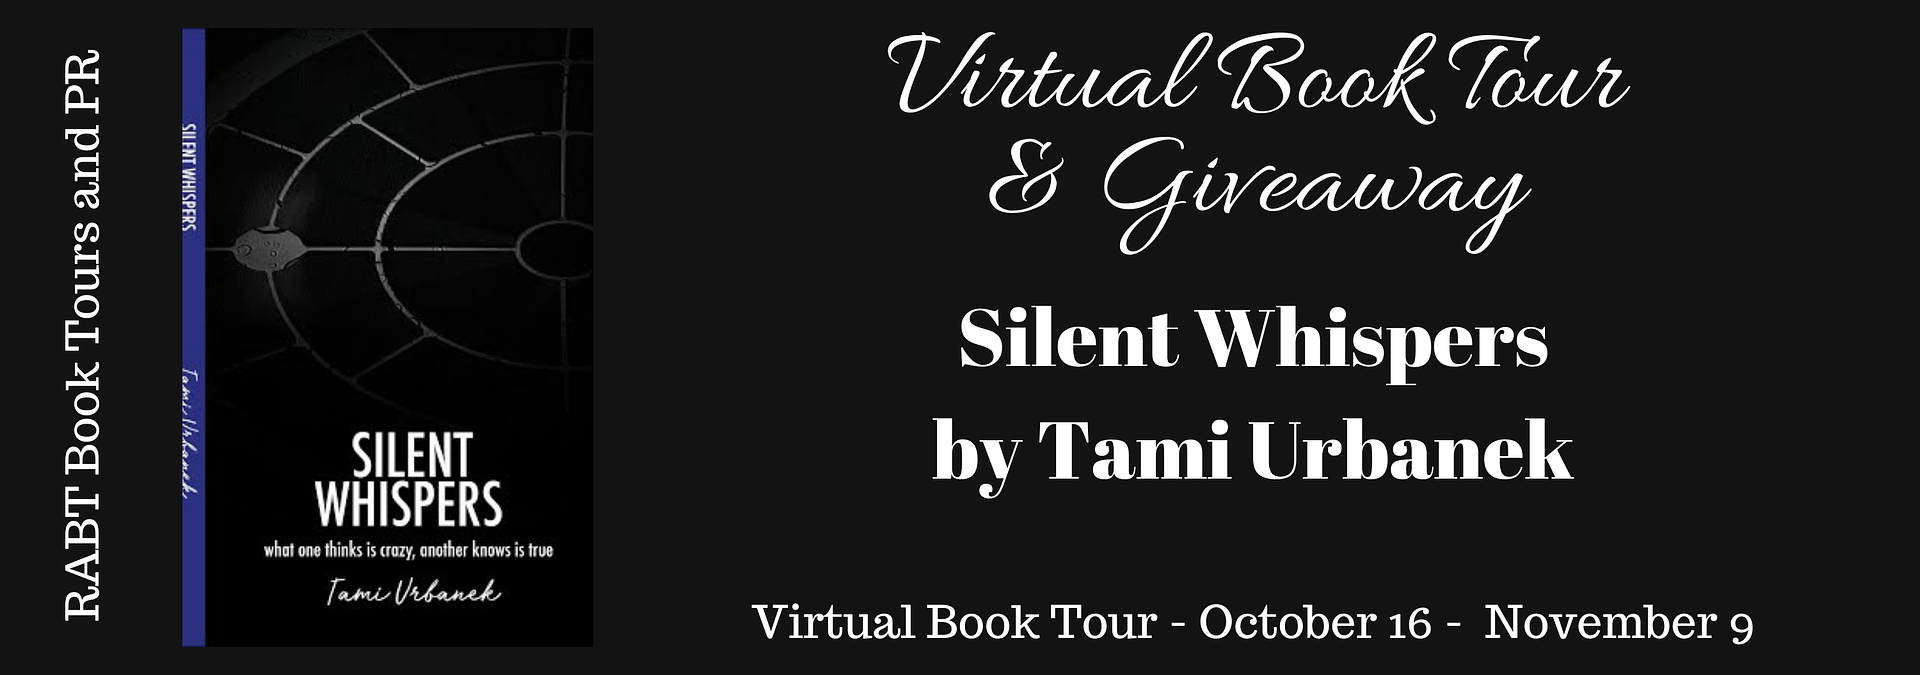 Virtual Book Tour: Silent Whispers by @tamiurbanek #review #giveaway #nonfiction 